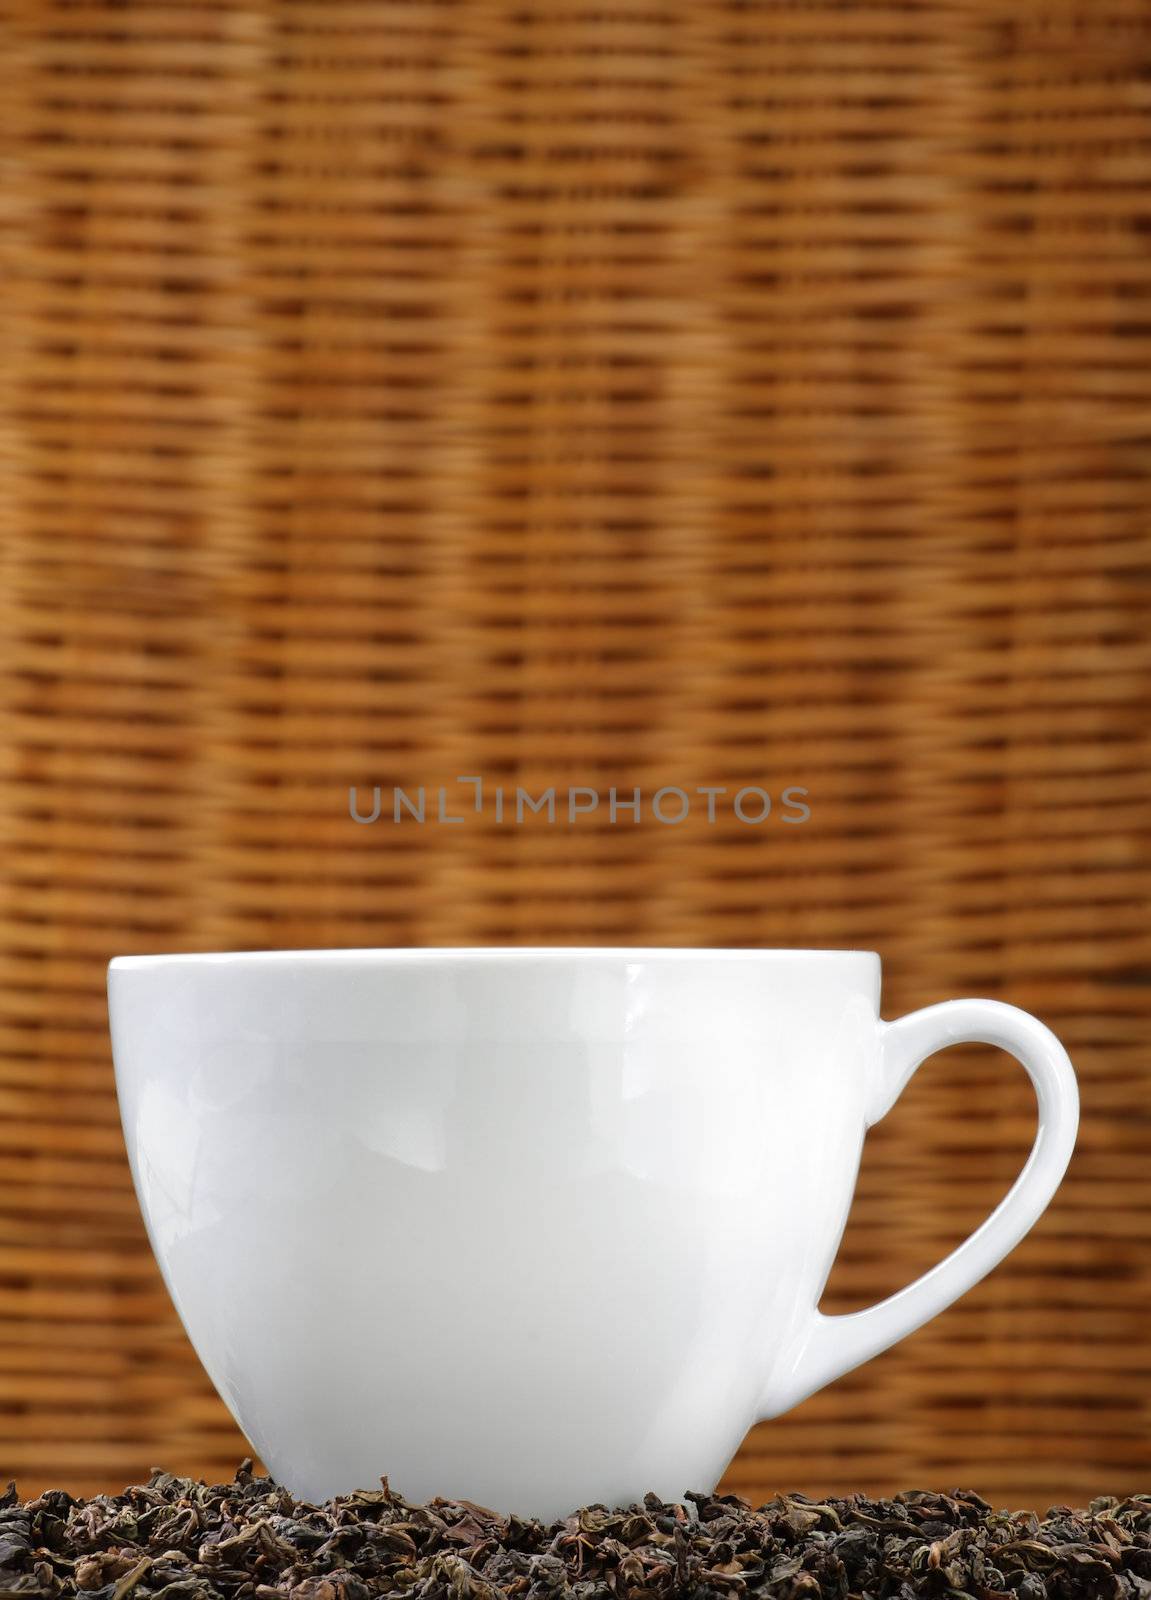 White tea cup on a bed of tea leaves with copy space.